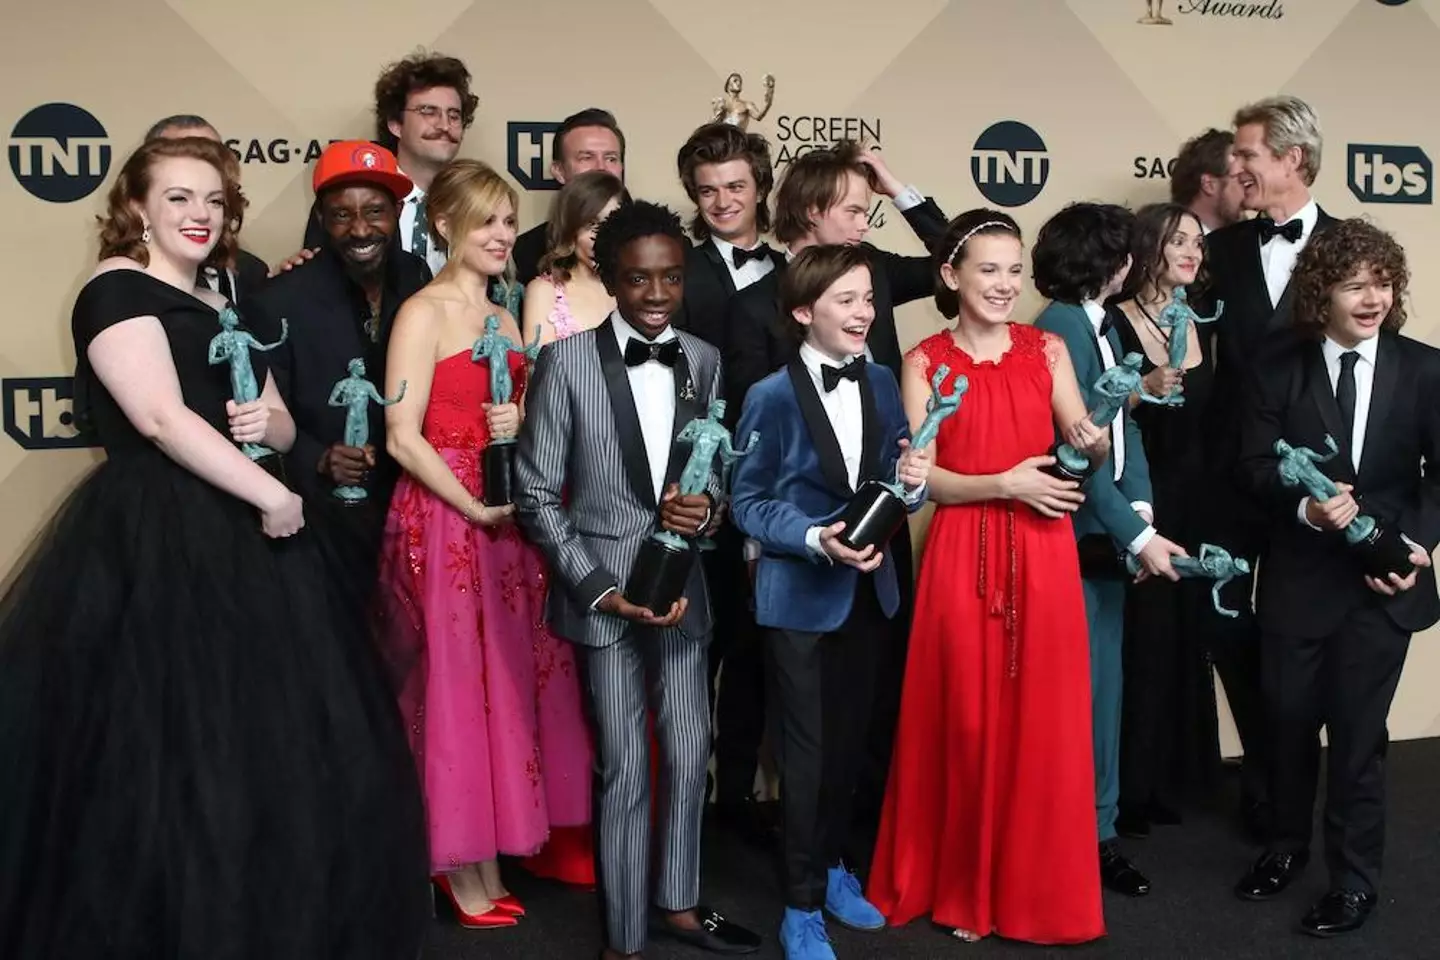 The cast are gearing up to film the final season of Stranger Things.